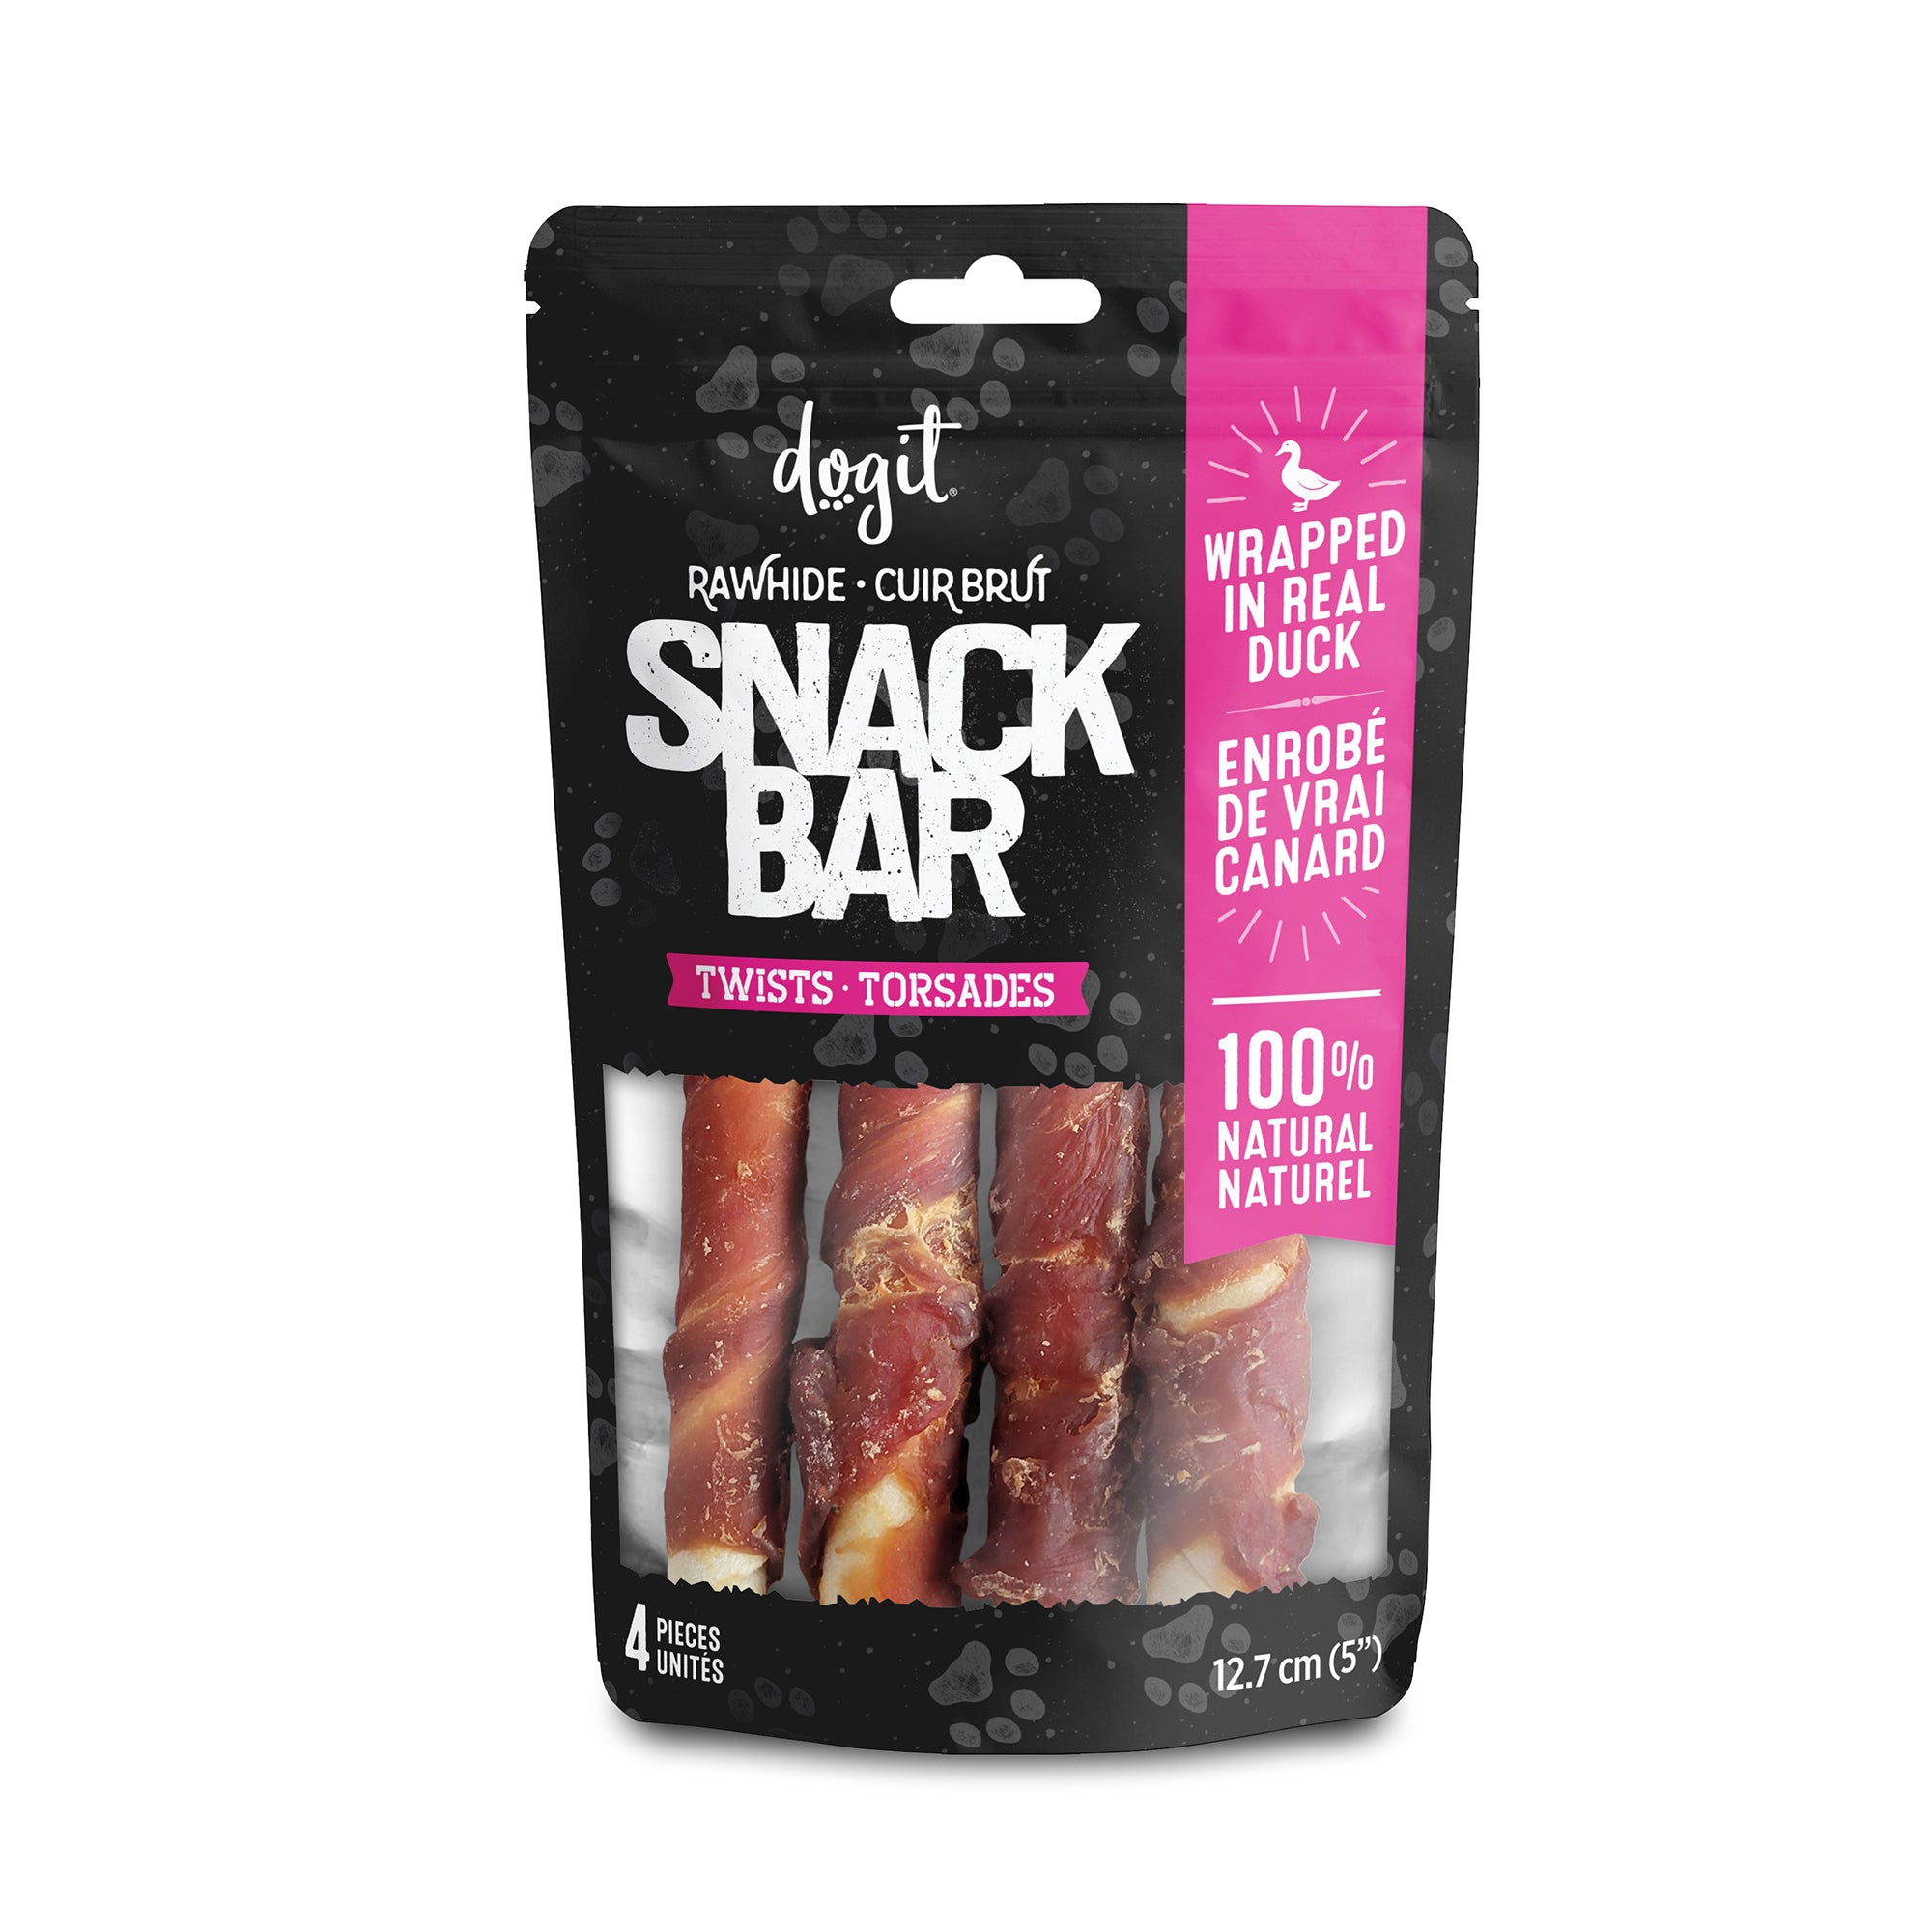 Dogit Snack Bar Rawhide - Duck-Wrapped Twists - 4 pcs (12.7 cm/5 in)